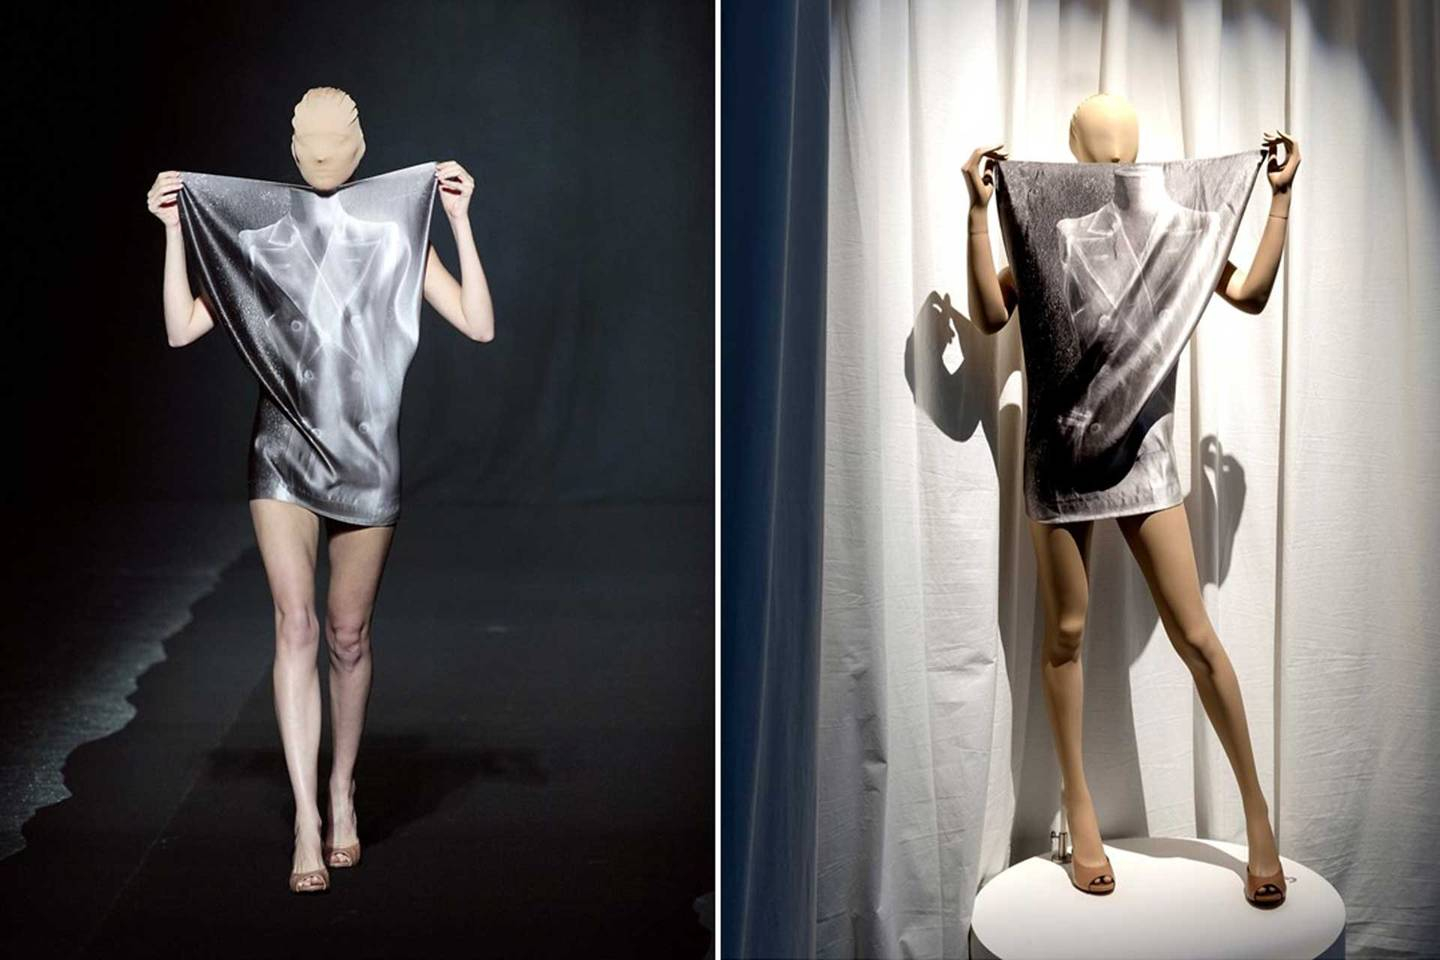 Martin Margiela’s double bill in Paris explores his personal legacy and ...